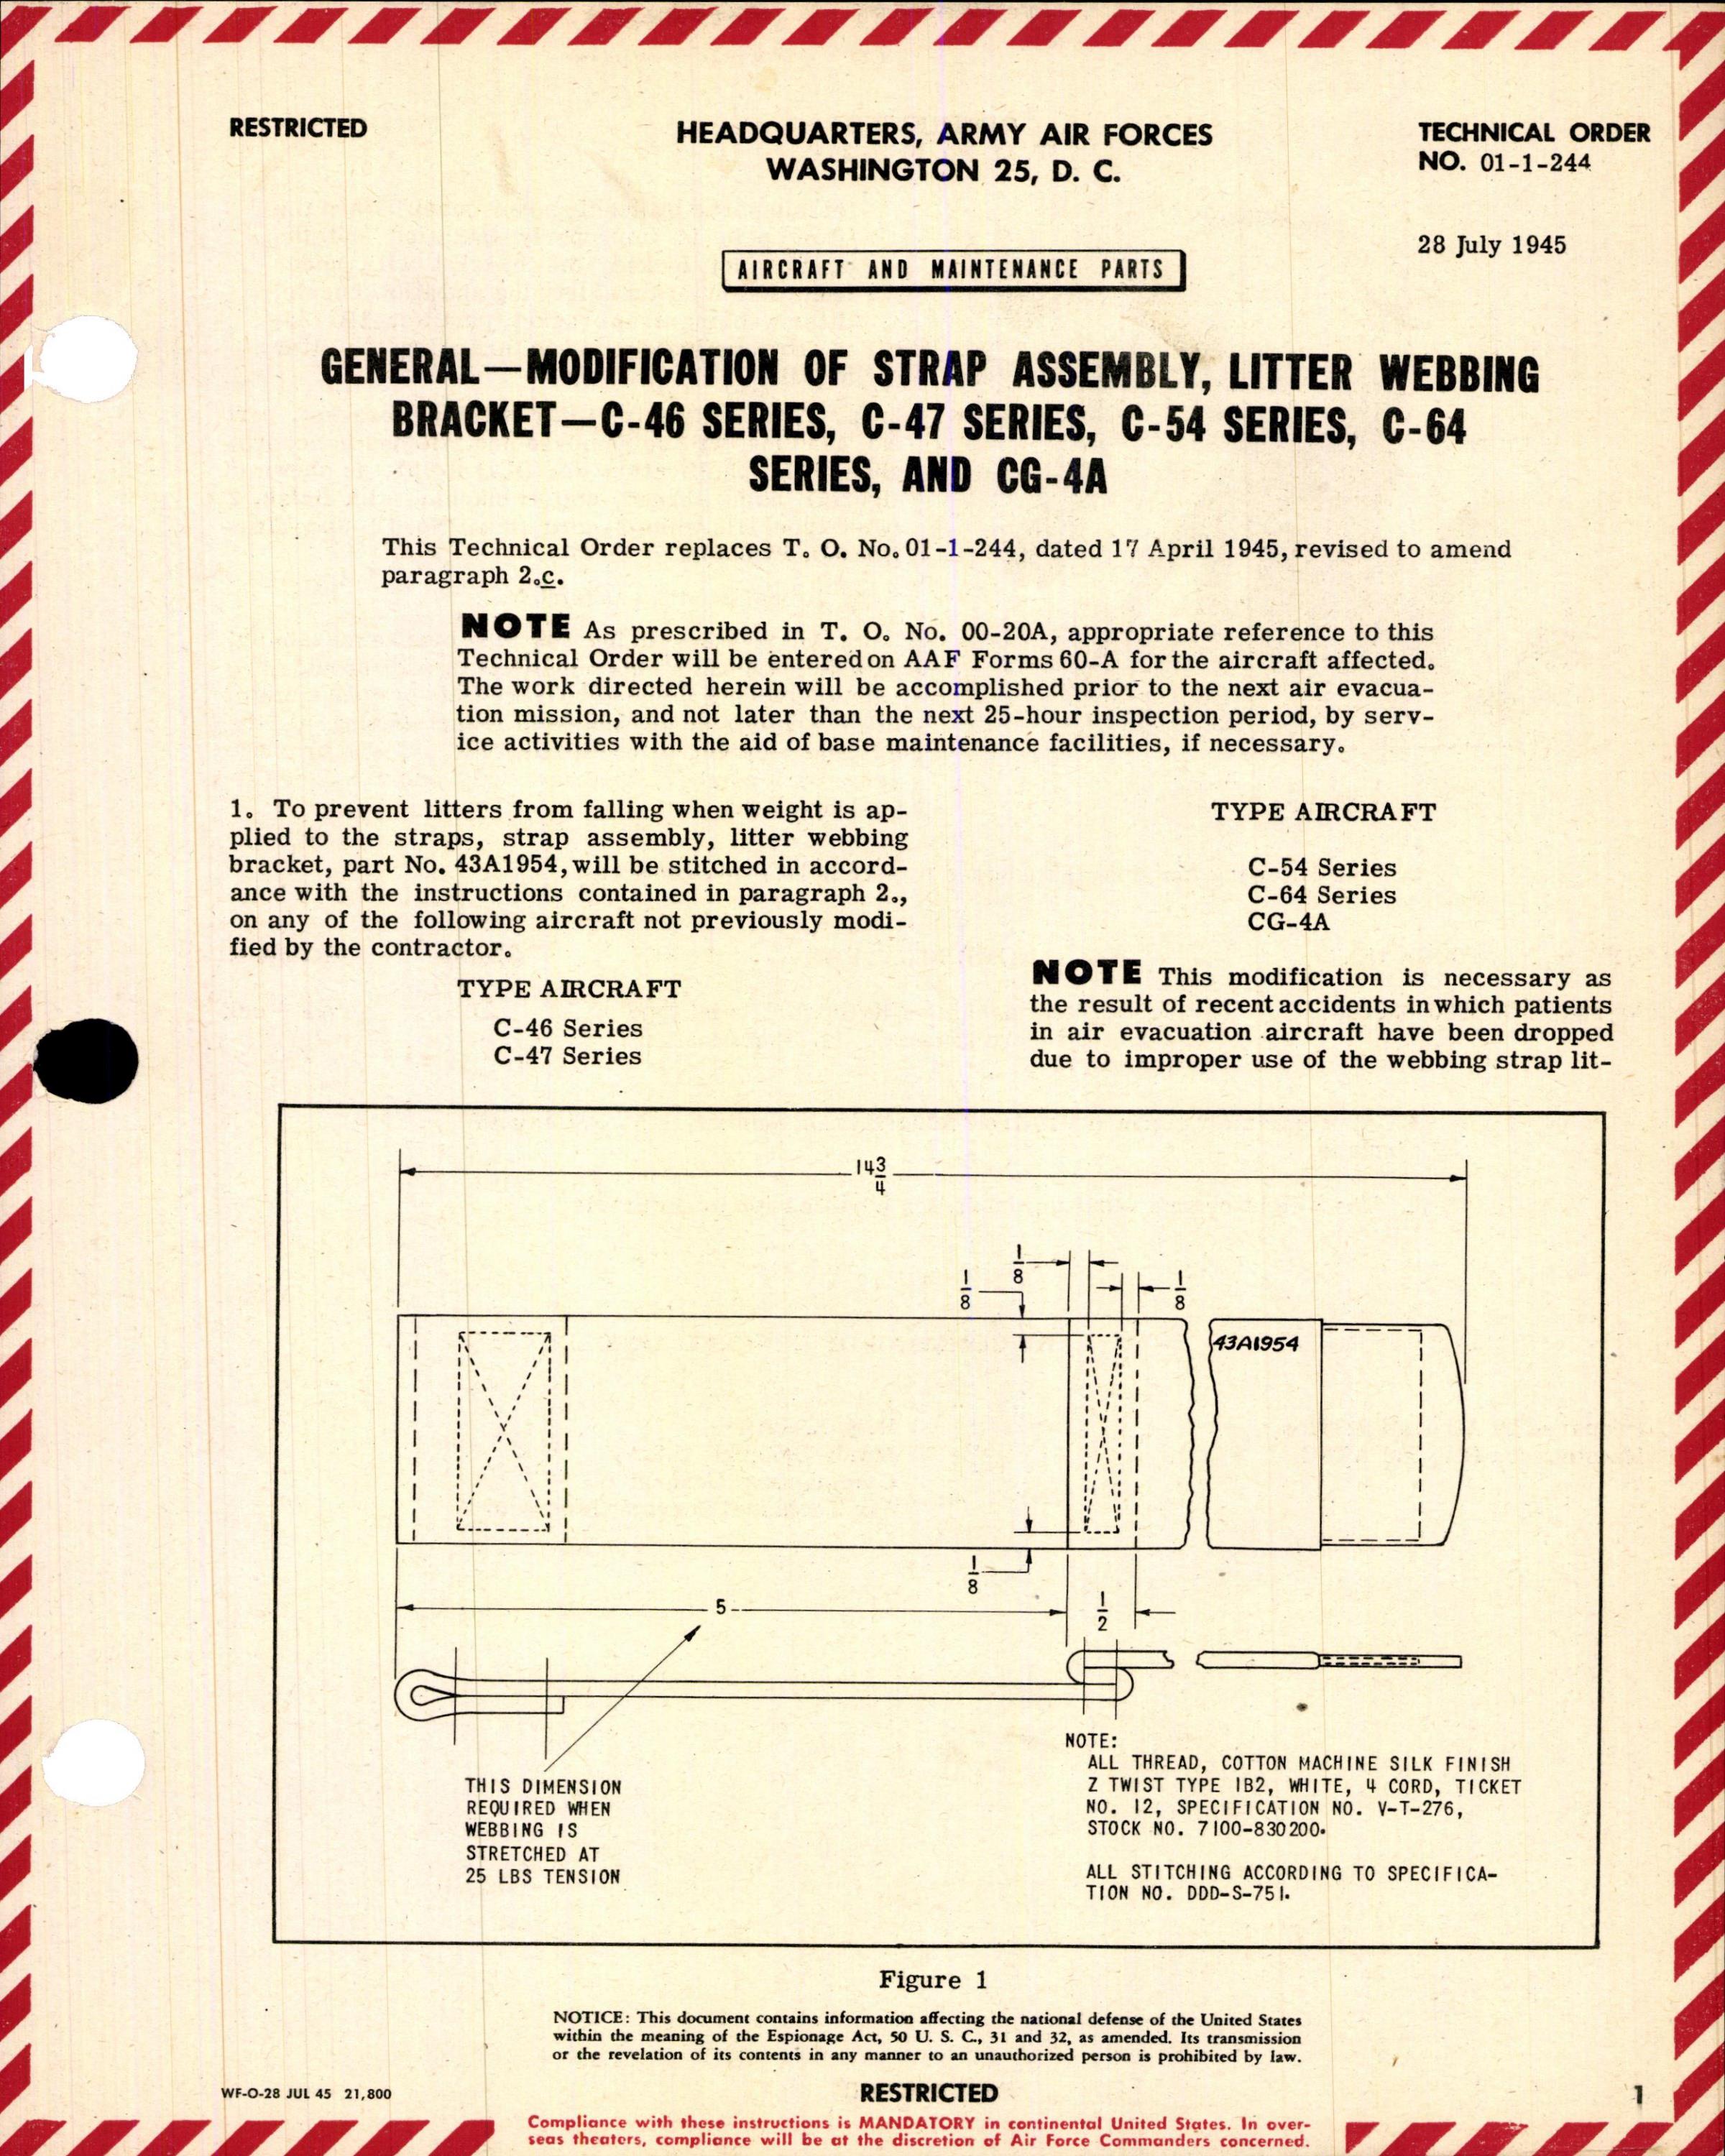 Sample page 1 from AirCorps Library document: Modification of Strap Assembly, Litter Webbing Bracket